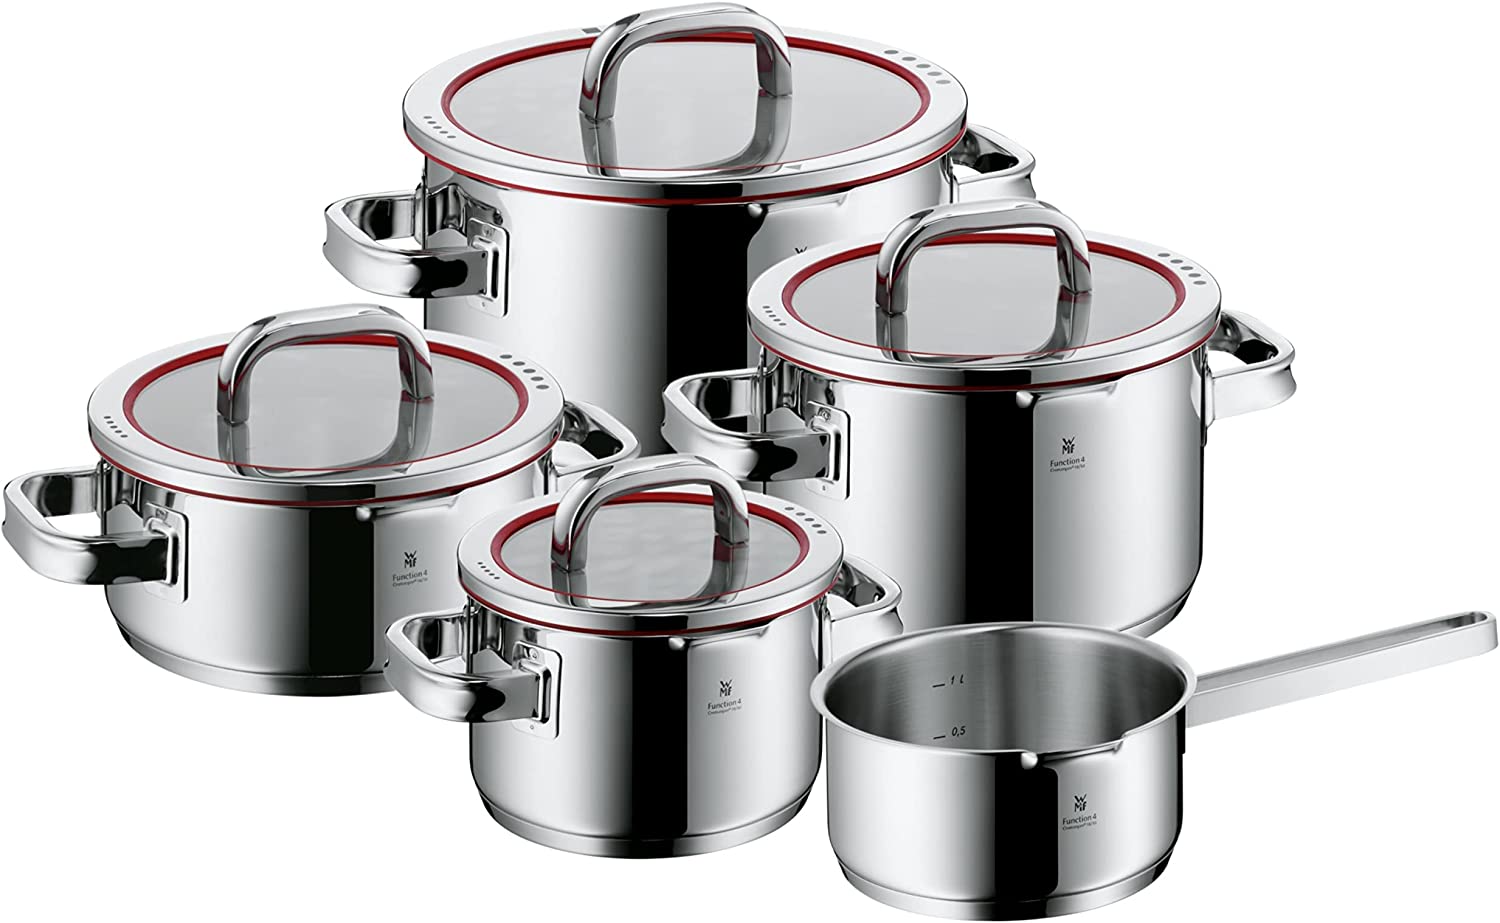 WMF Set of 4 Pots, Scale on Inside, Lid with 4 Pouring Functions, Glass Lid, Polished Cromargan Stainless Steel, Suitable for Induction Cookers, Dishwasher-Safe